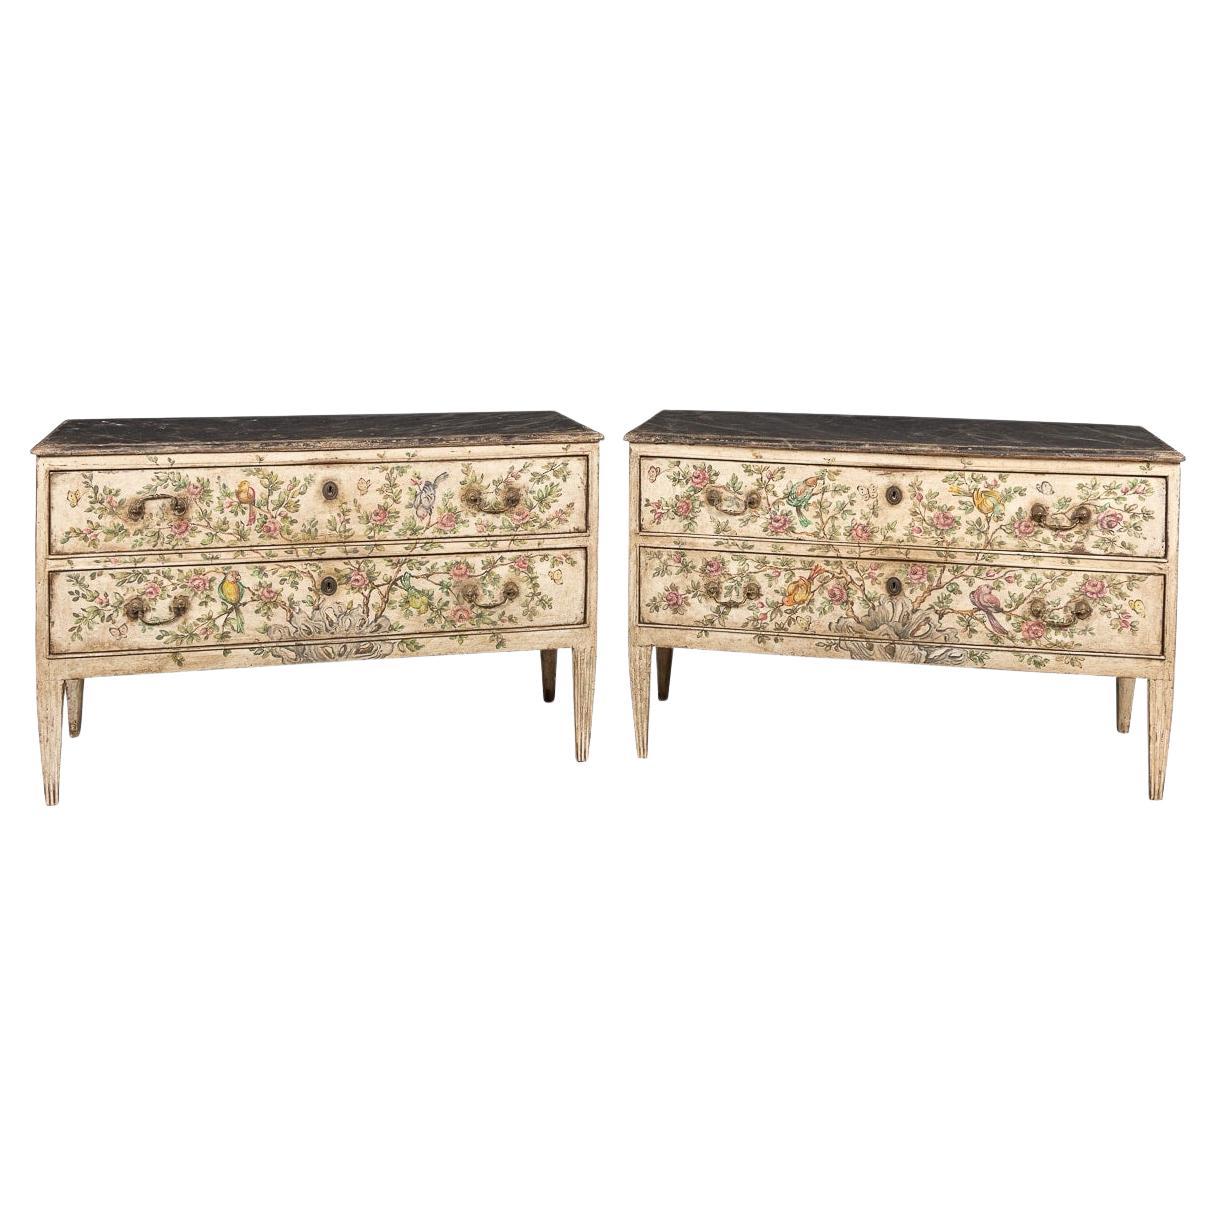 Pair Of 20th Century Italian Wooden Commodes With Naturalistic Theme c.1900 For Sale